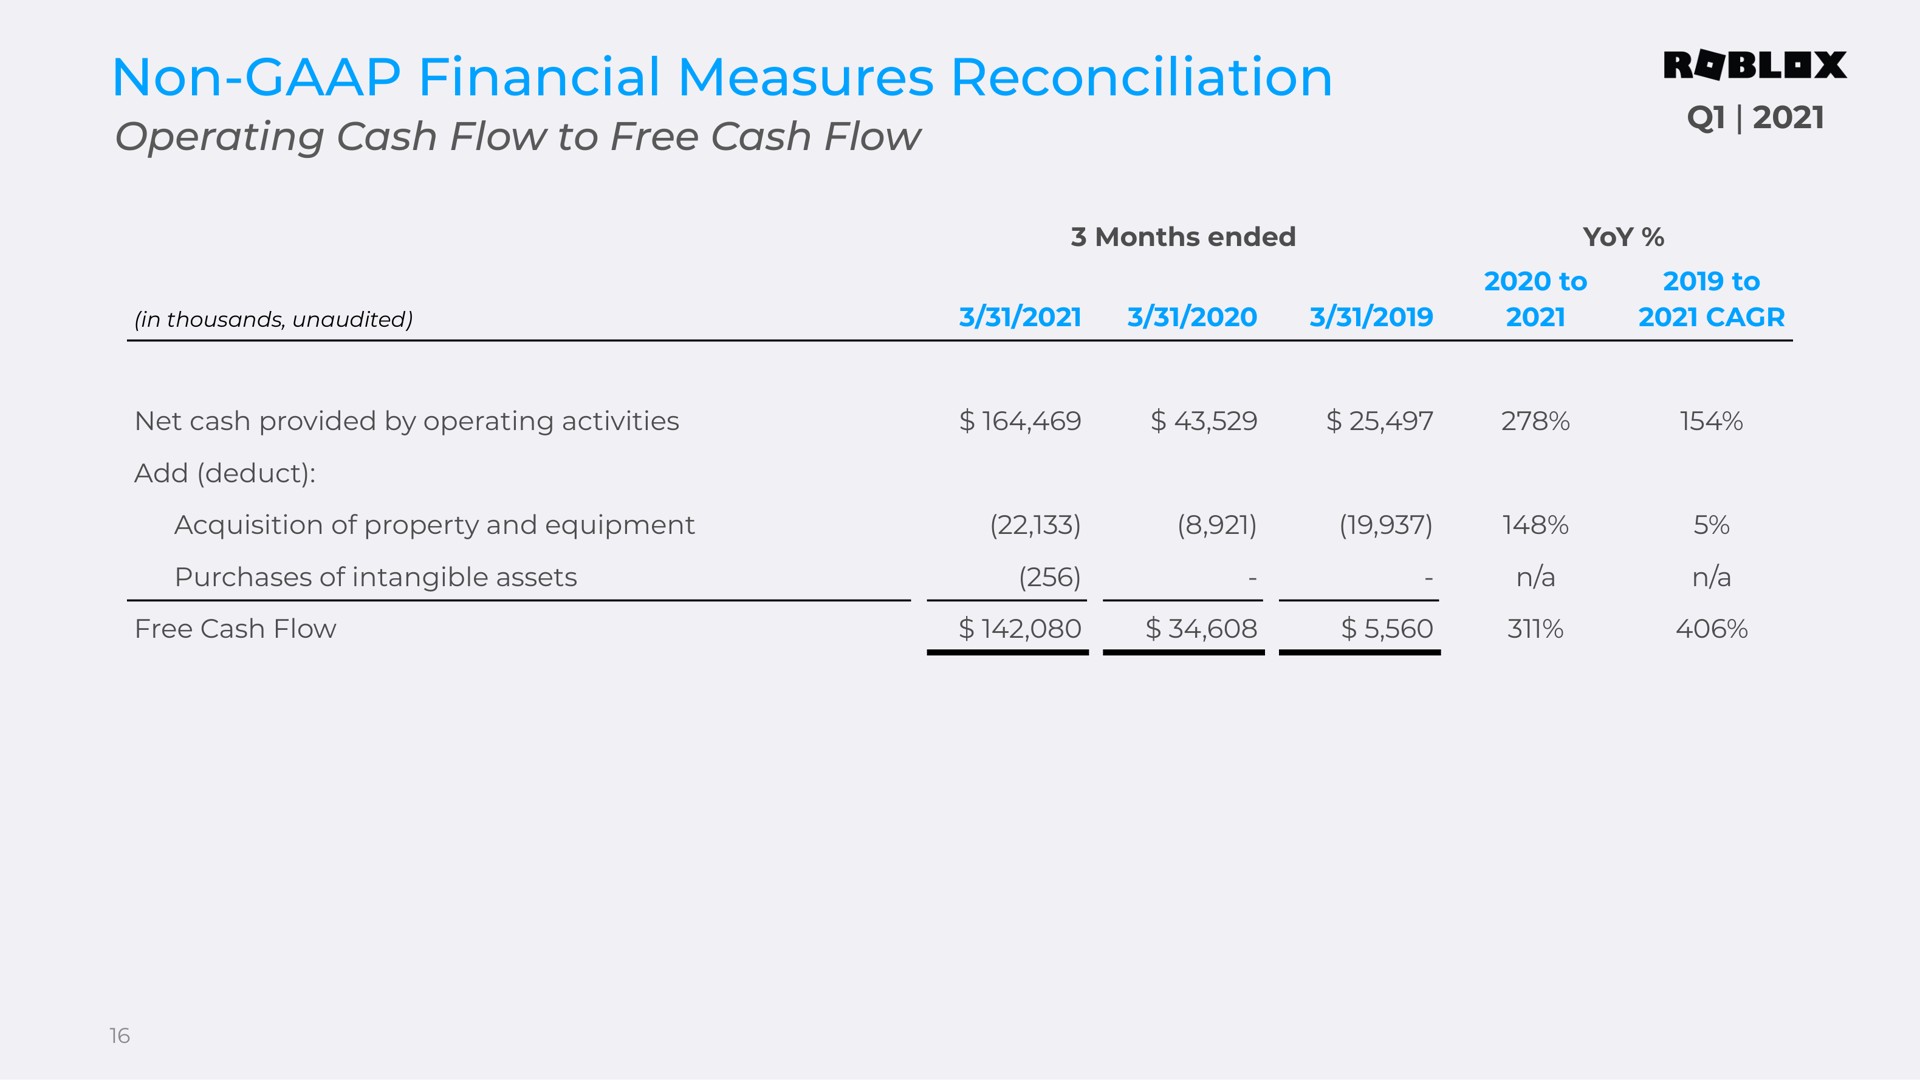 non financial measures reconciliation operating cash flow to free cash flow | Roblox